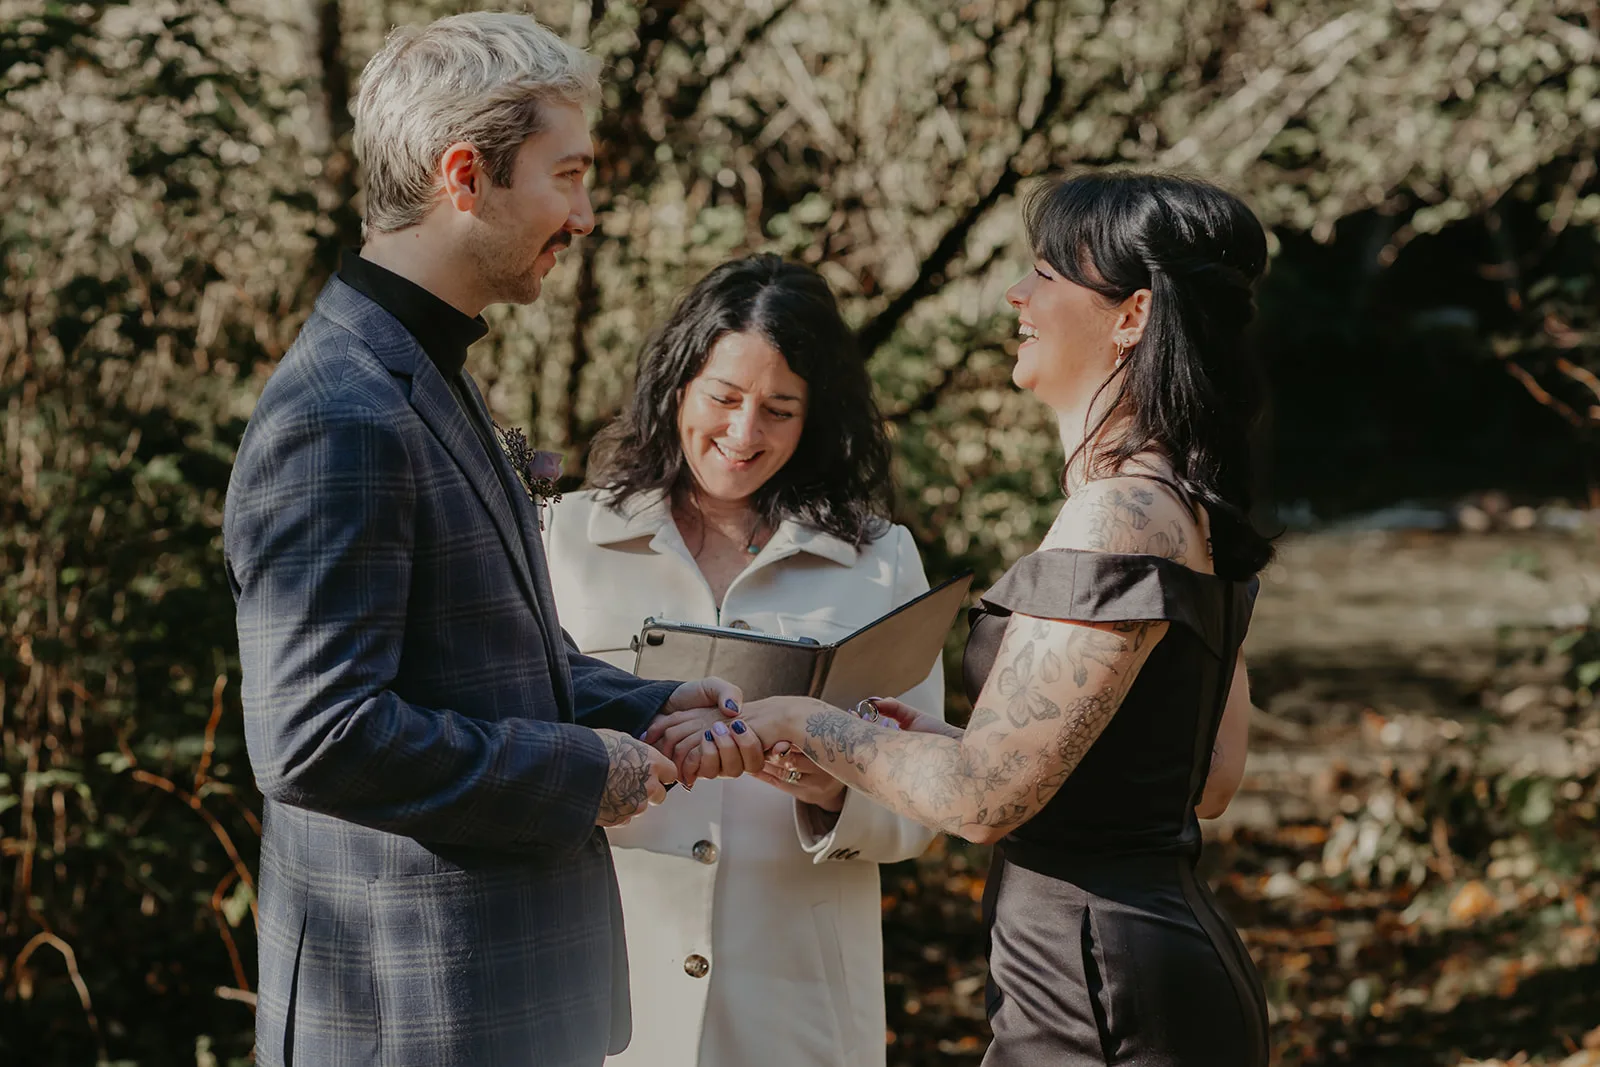 Erika Enns officiating an elopement ceremony in Vancouver